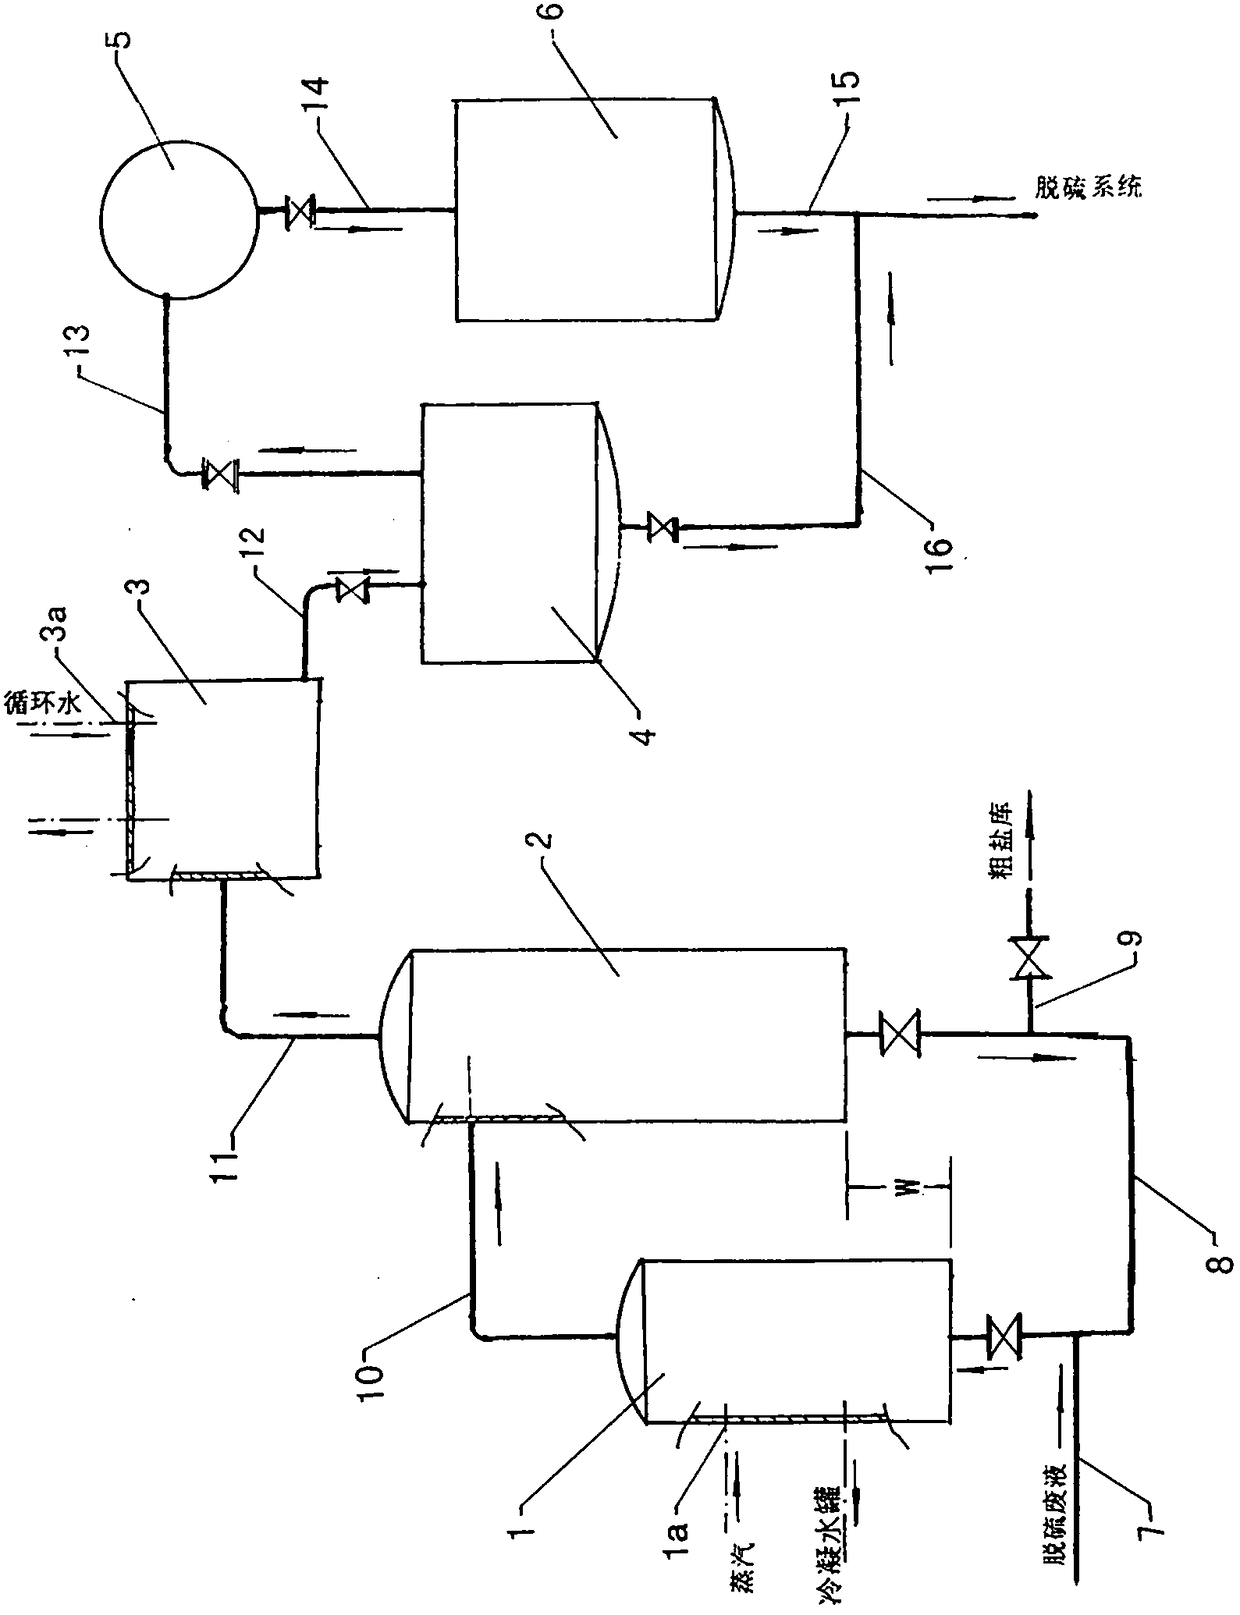 Process for extracting secondary salt from desulfurization waste liquid